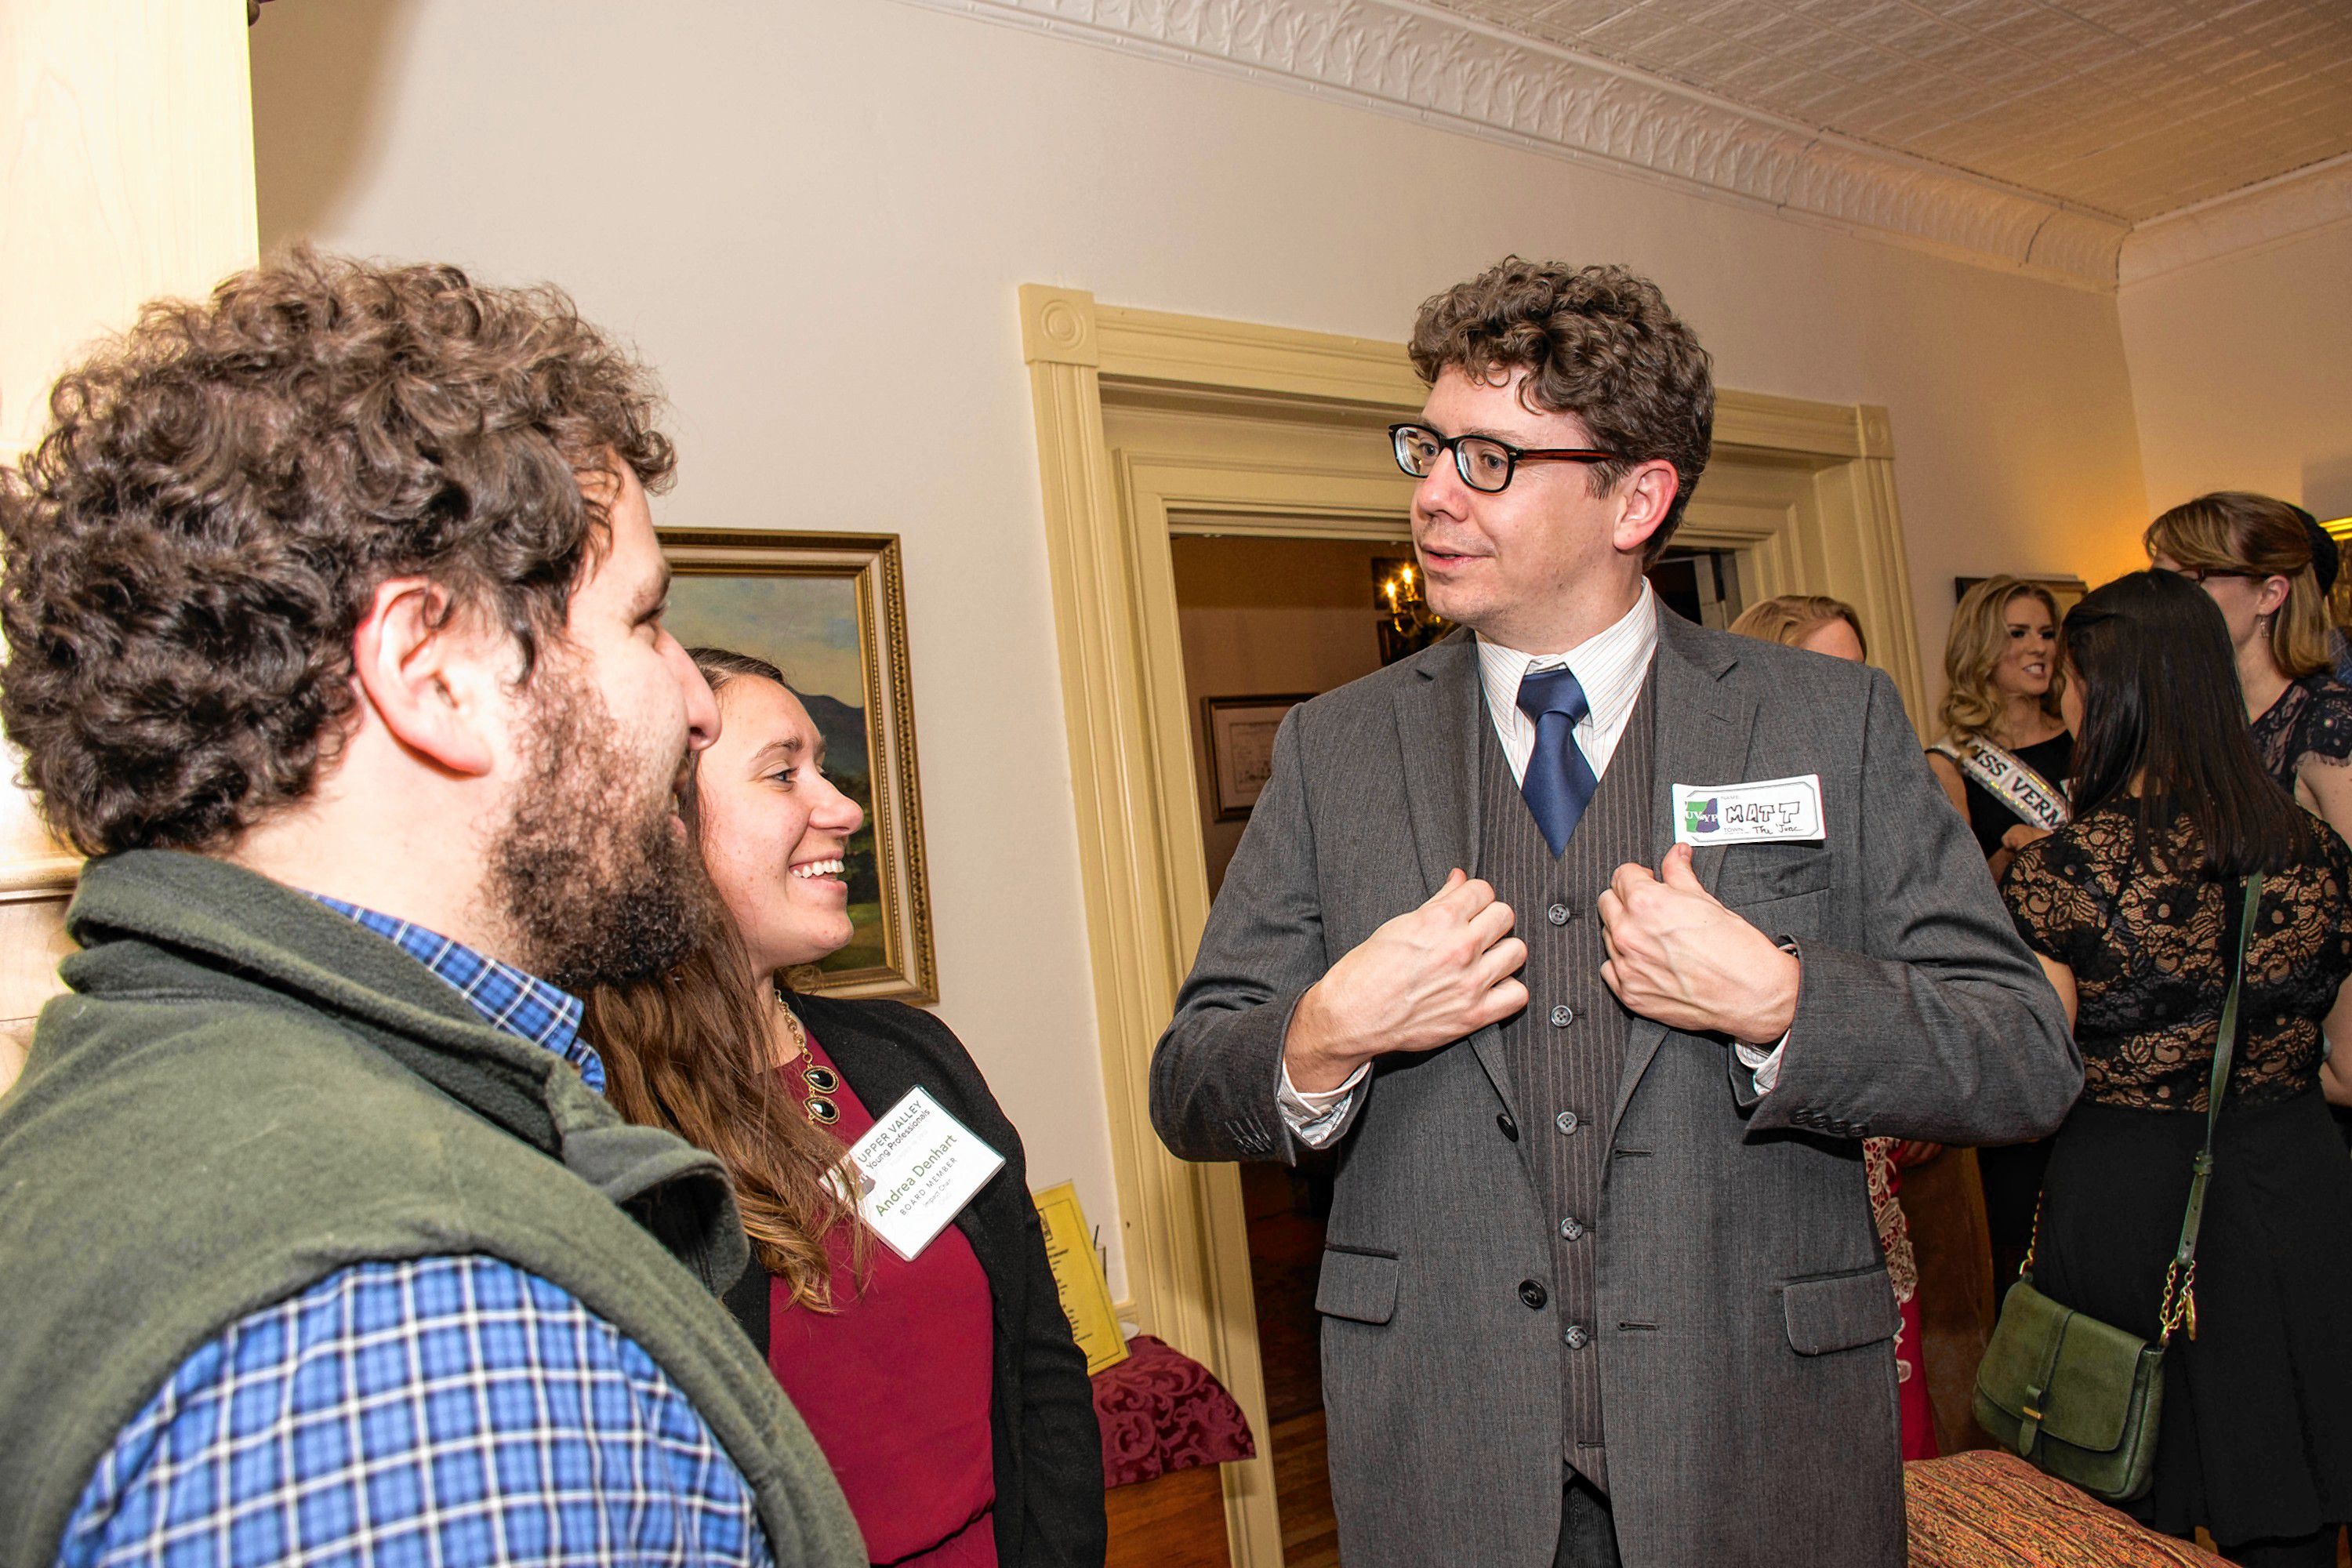 Matt Young, right, of White River Junction, a graphic designer and cartoonist and a co-founder of the Upper Valley Young Professionals, speaks with Jack Kaunders and Andrea Denhardt at the group's holiday party and canned food drive at the Norwich Inn on Dec. 15. (Nancy Nutile-McMenemy photograph, photosbynanci@comcast.net)